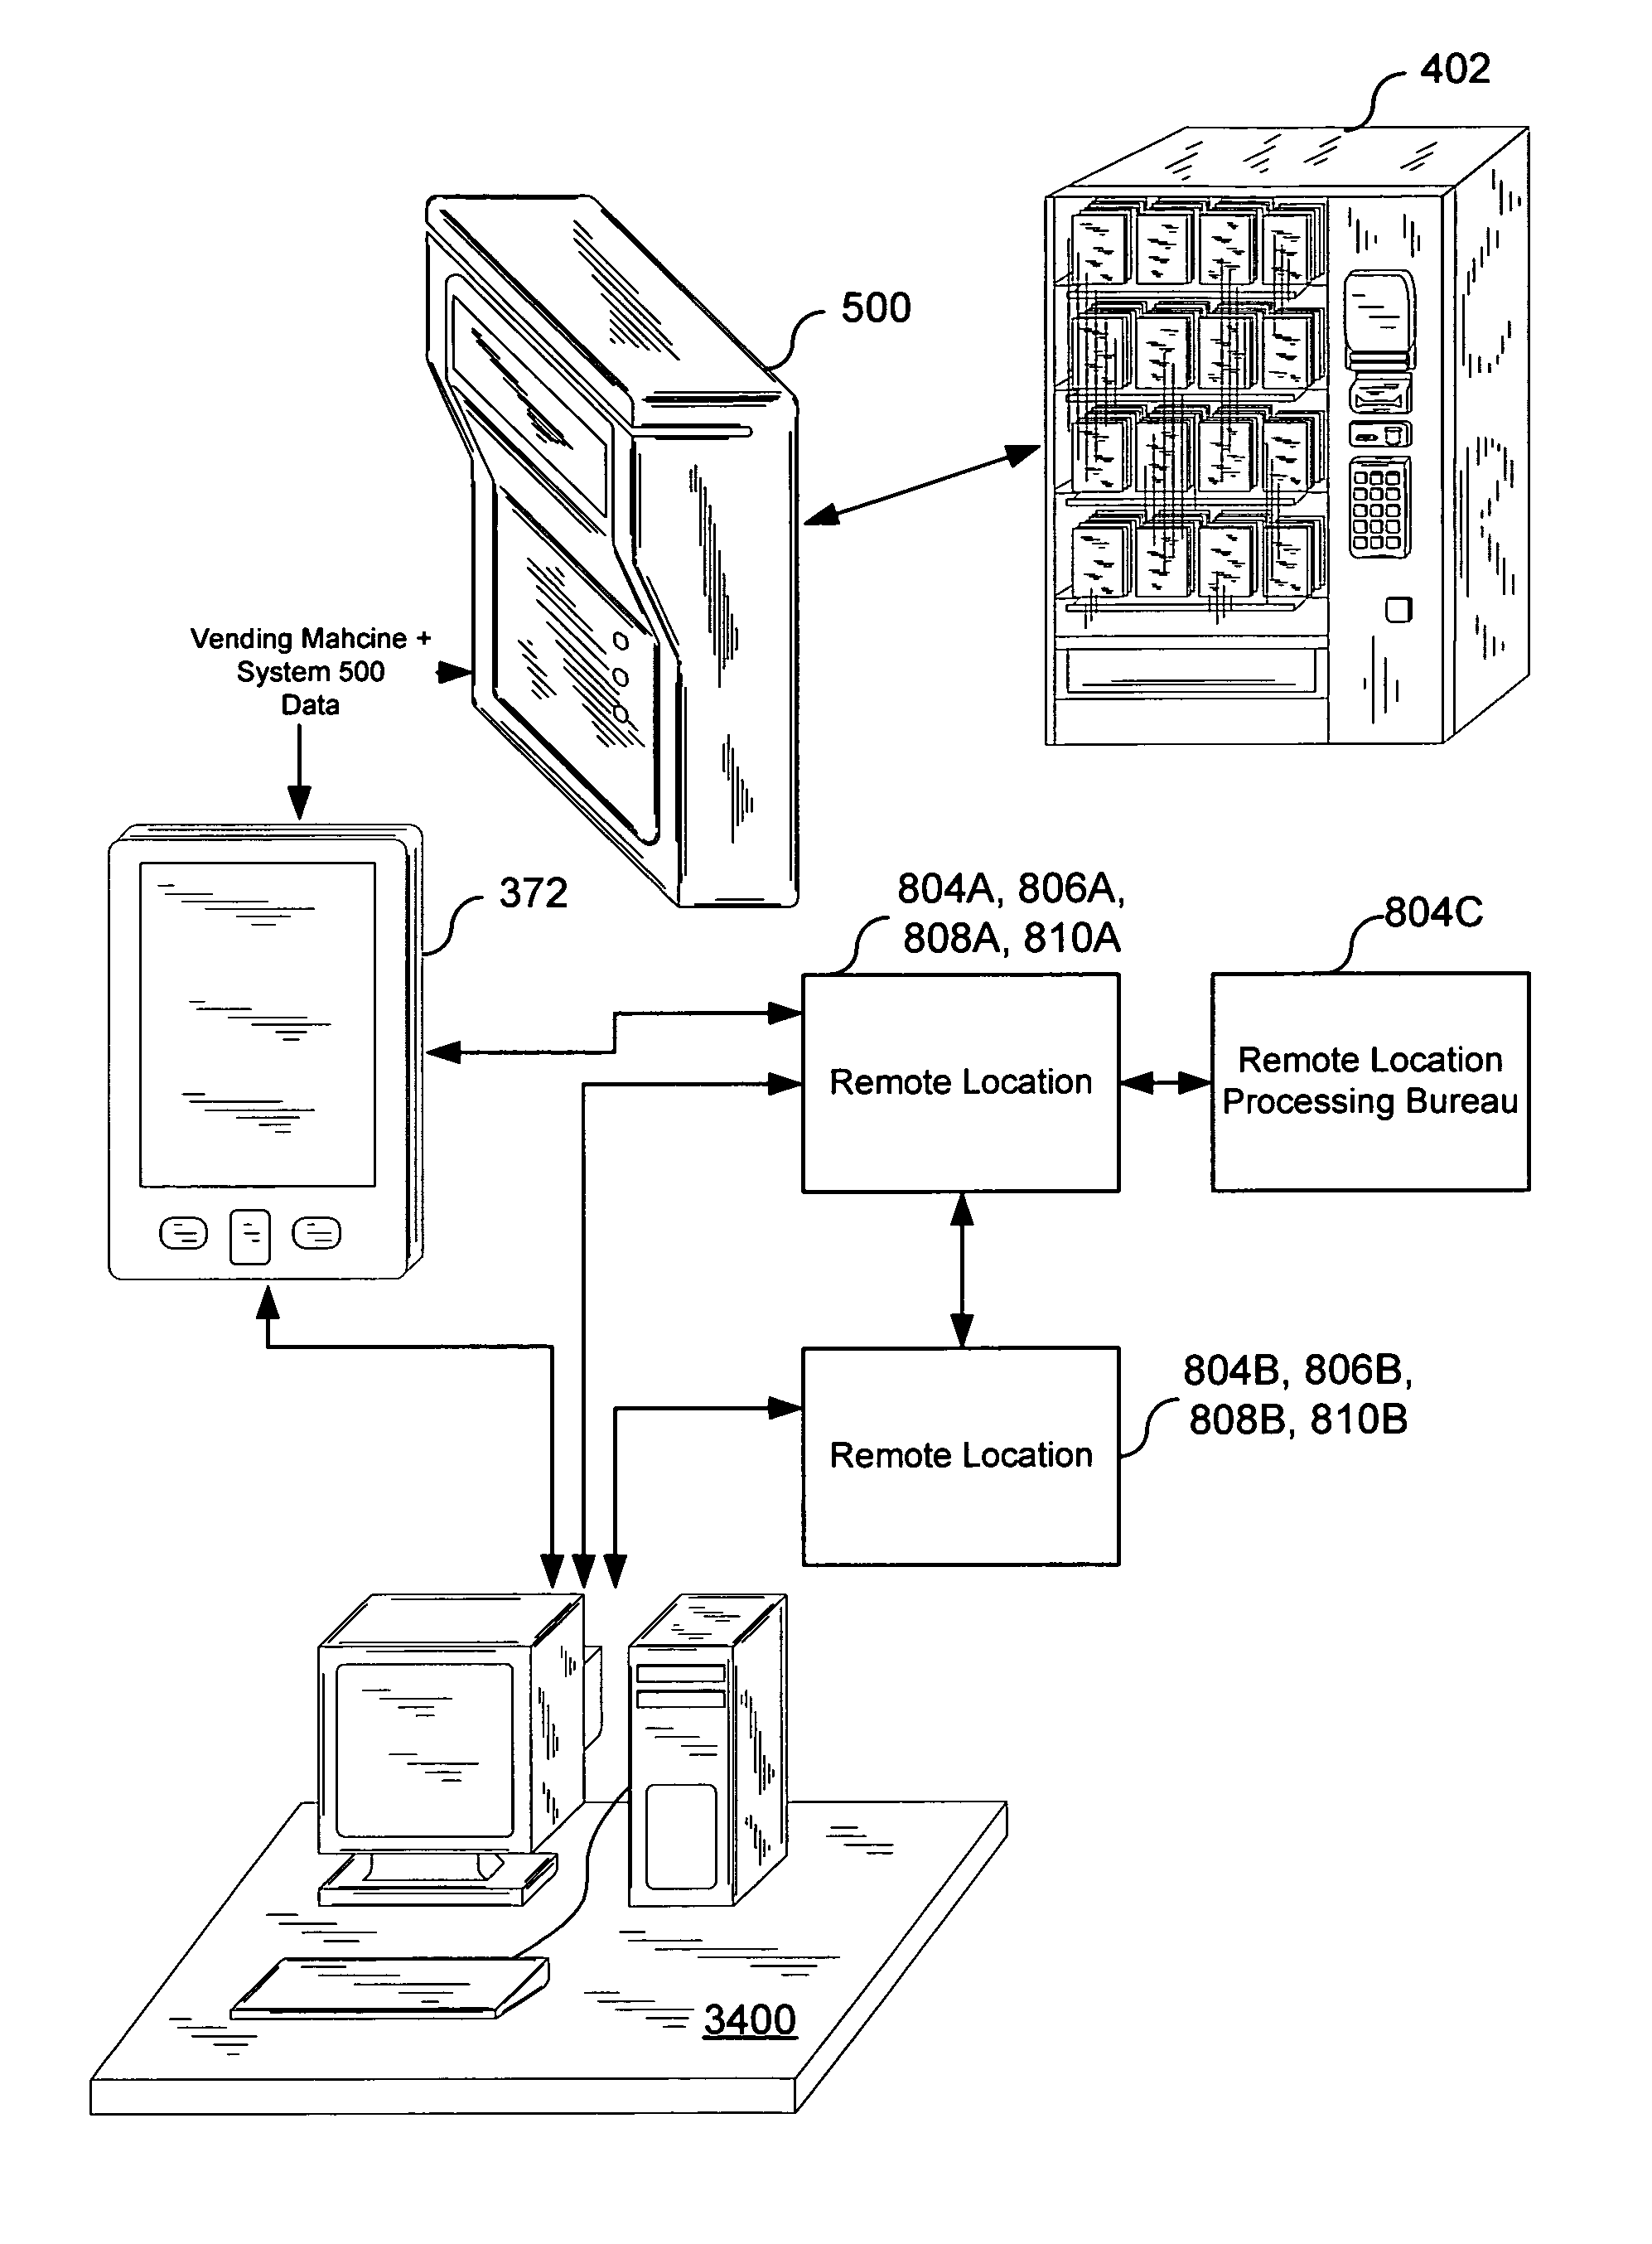 Cashless vending system with tethered payment interface